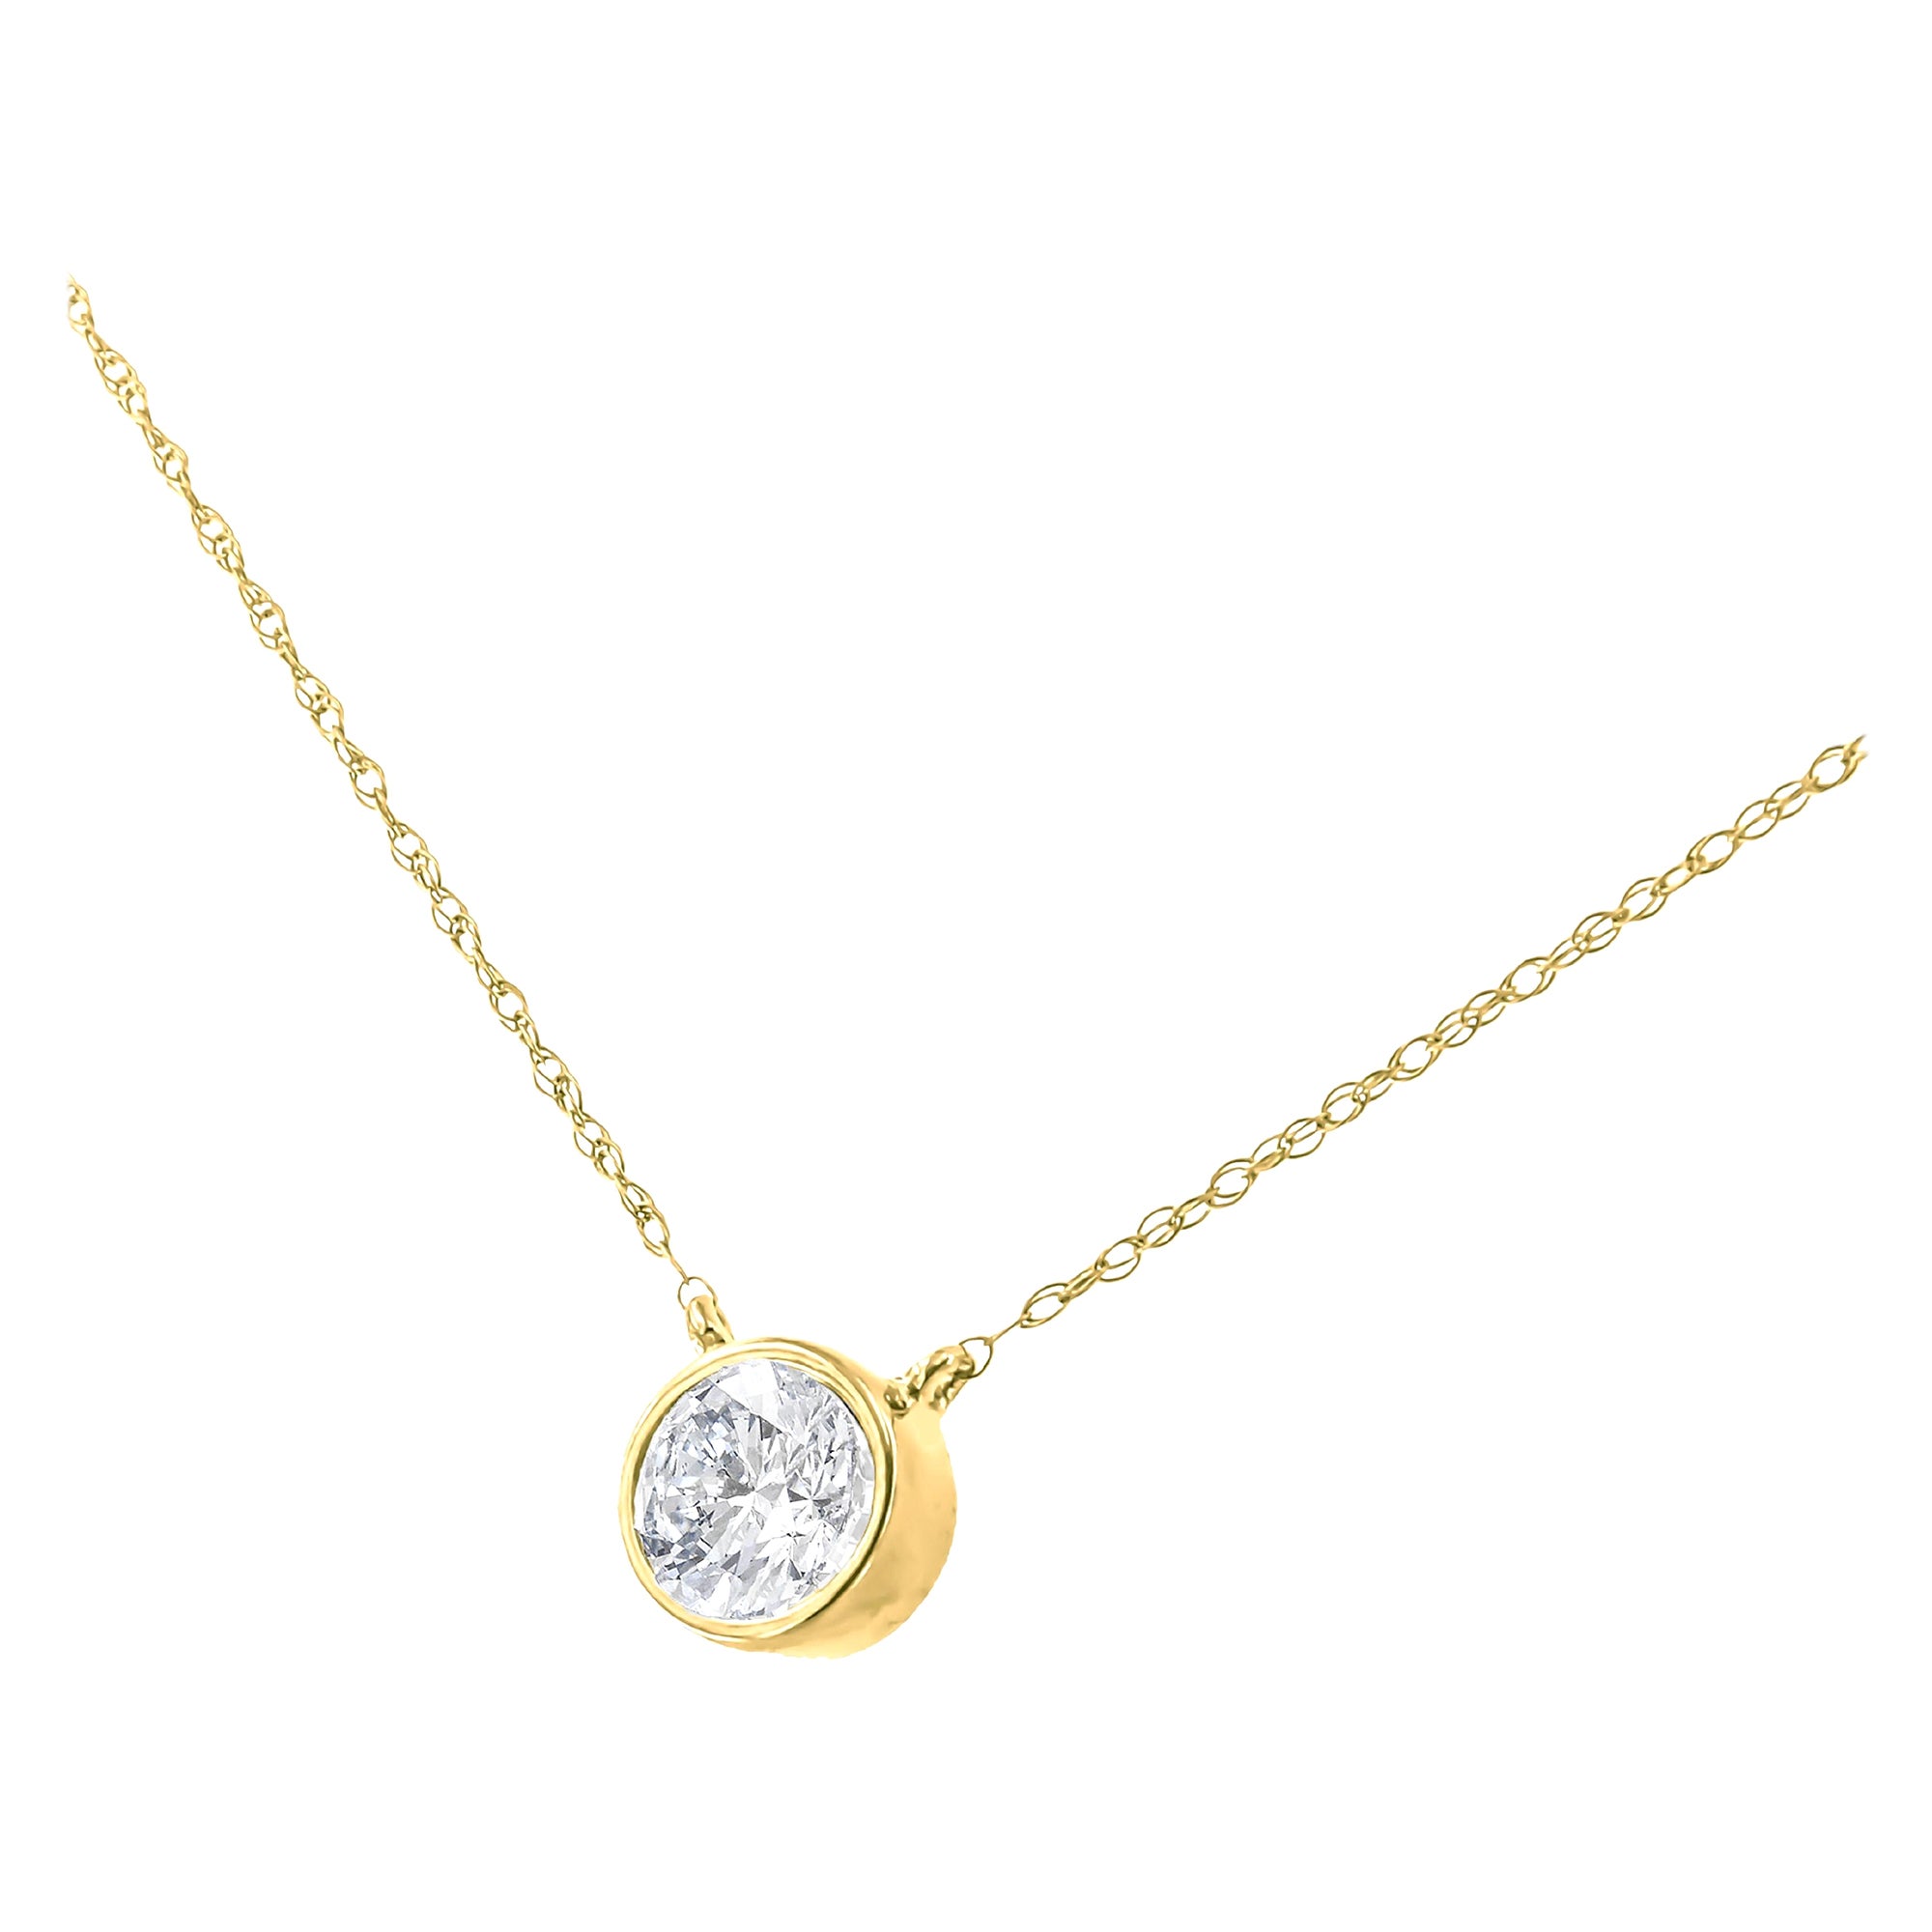 AGS Certified 10k Yellow Gold 1/3 Carat Round Diamond Solitaire Pendant Necklace